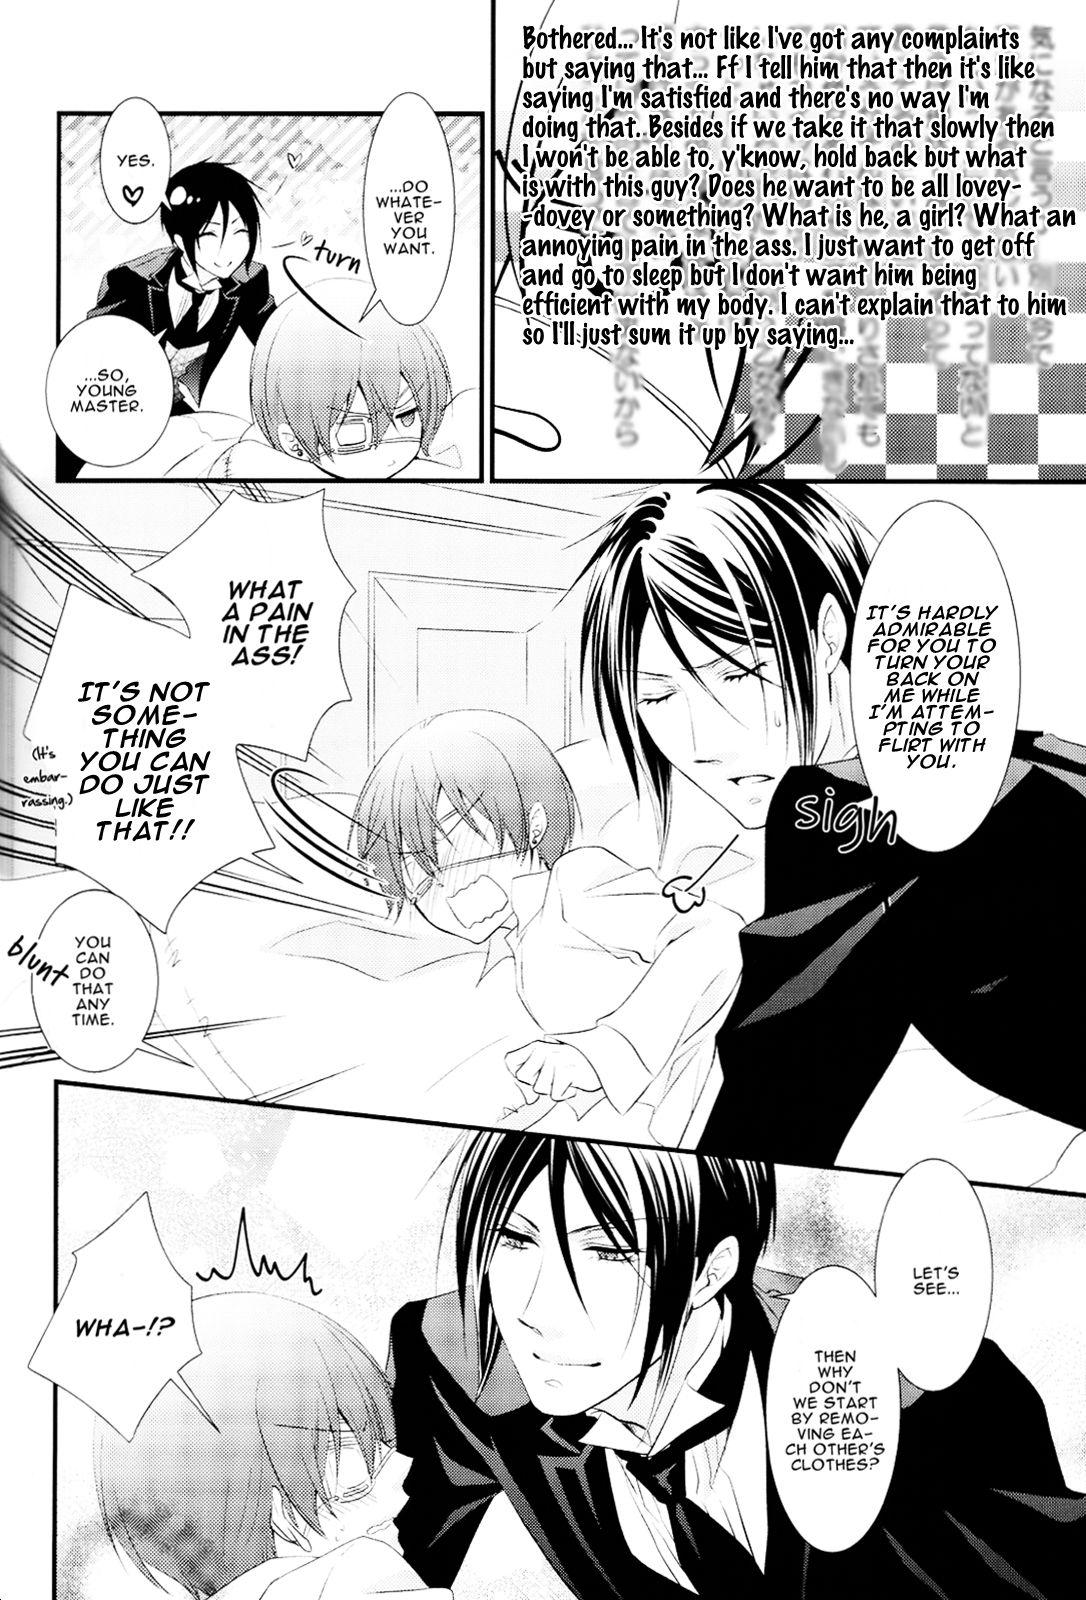 Animation Slow - Black butler Street Fuck - Page 3